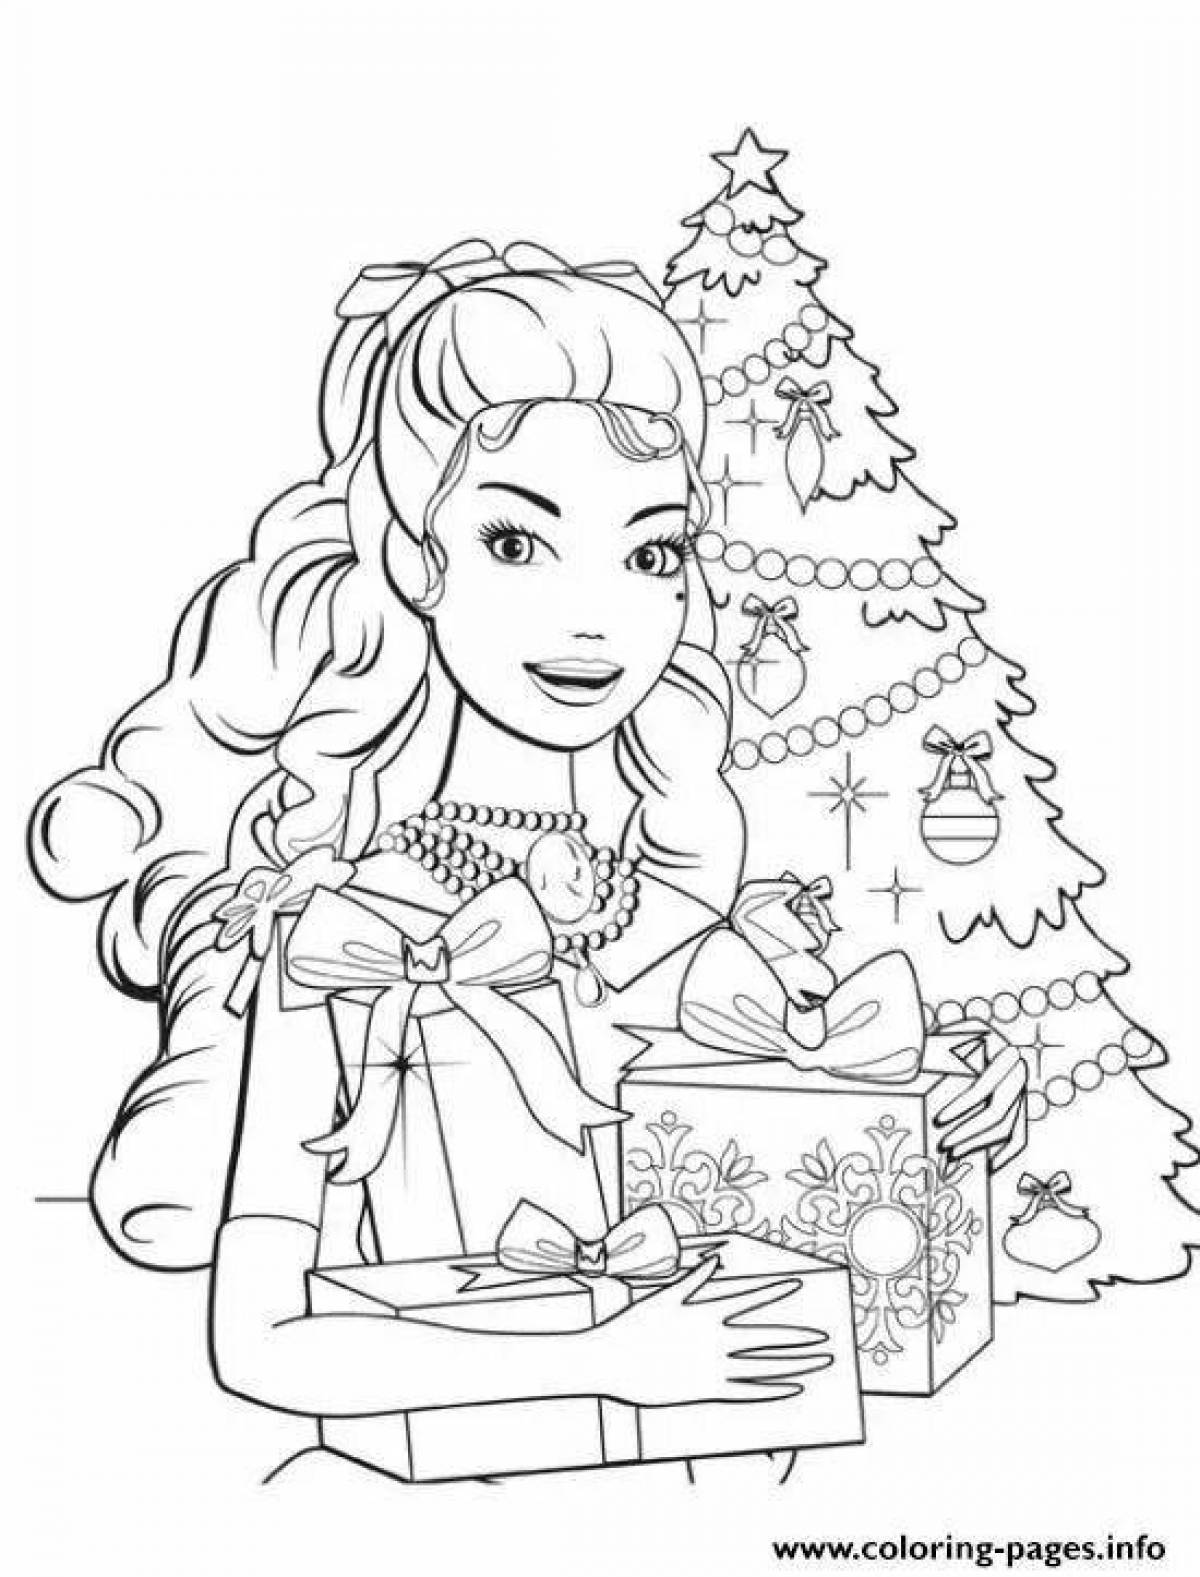 Big winter coloring book for girls